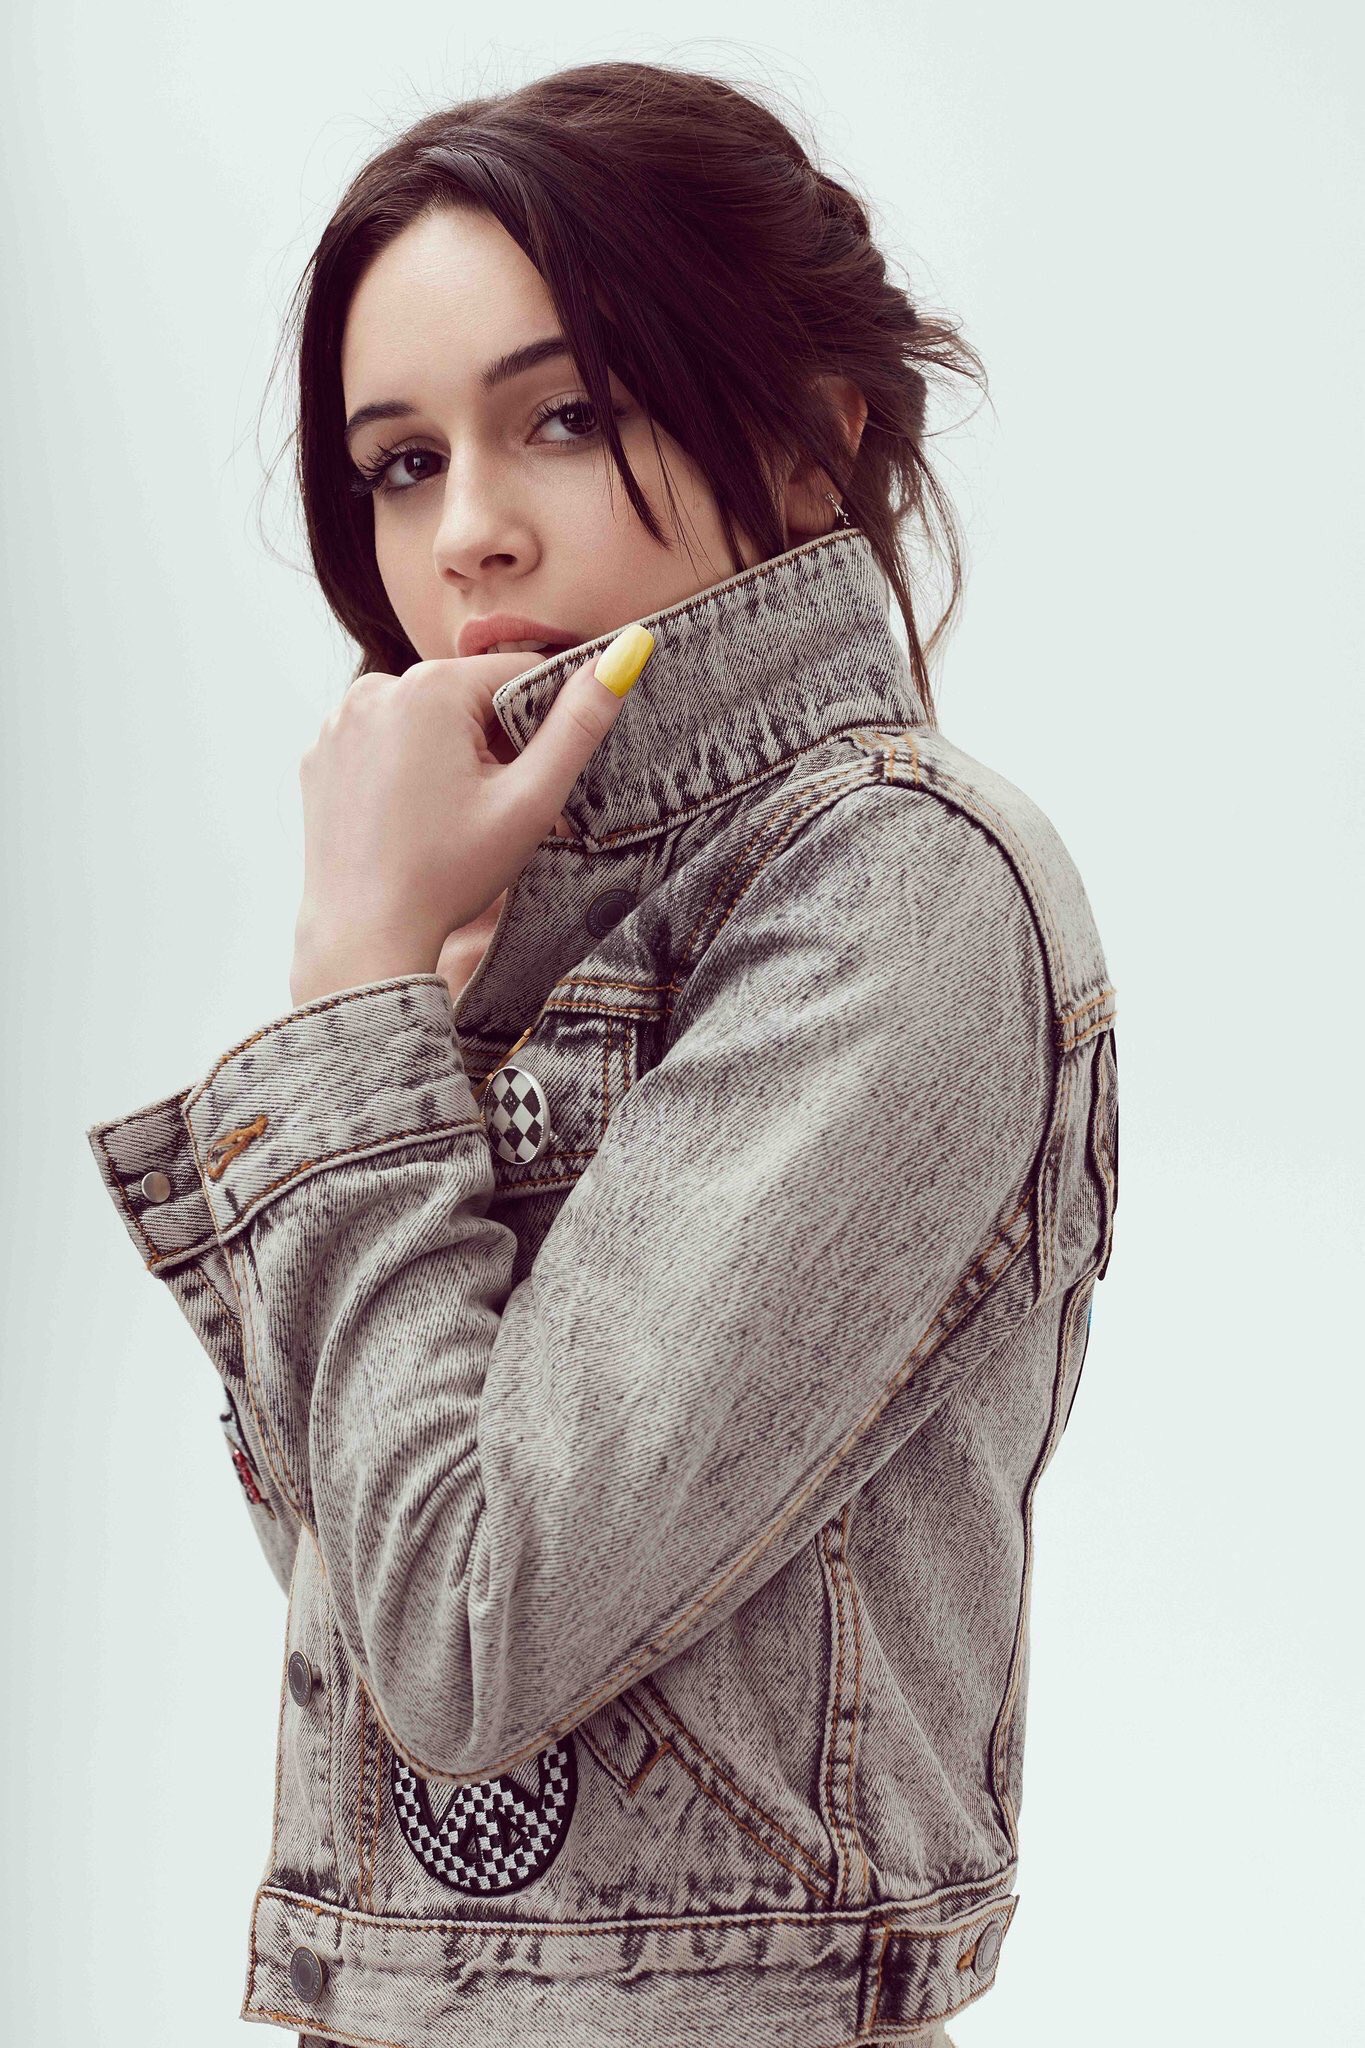 Bea Miller Women Singer Actress Painted Nails Simple Background White Background Jean Jacket 1365x2048